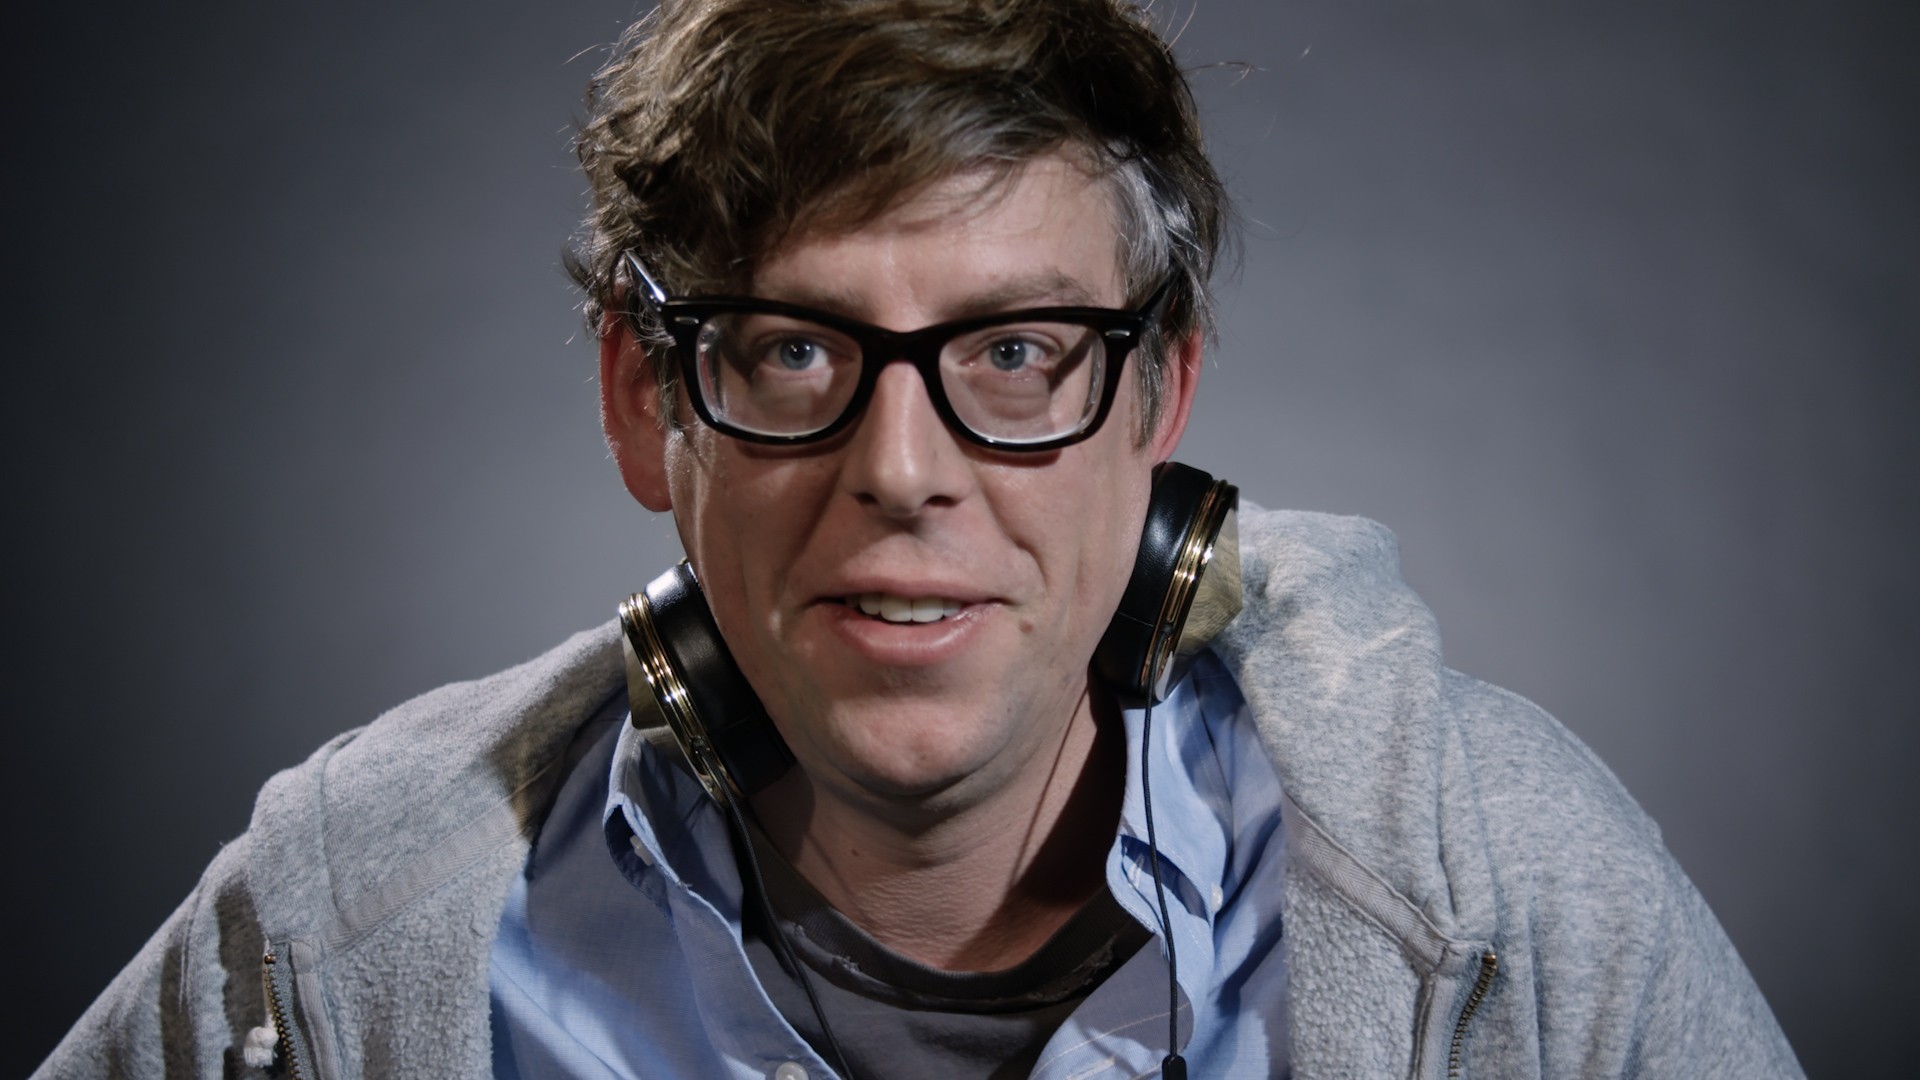 The Black Keys' Patrick Carney is having the most fun these days